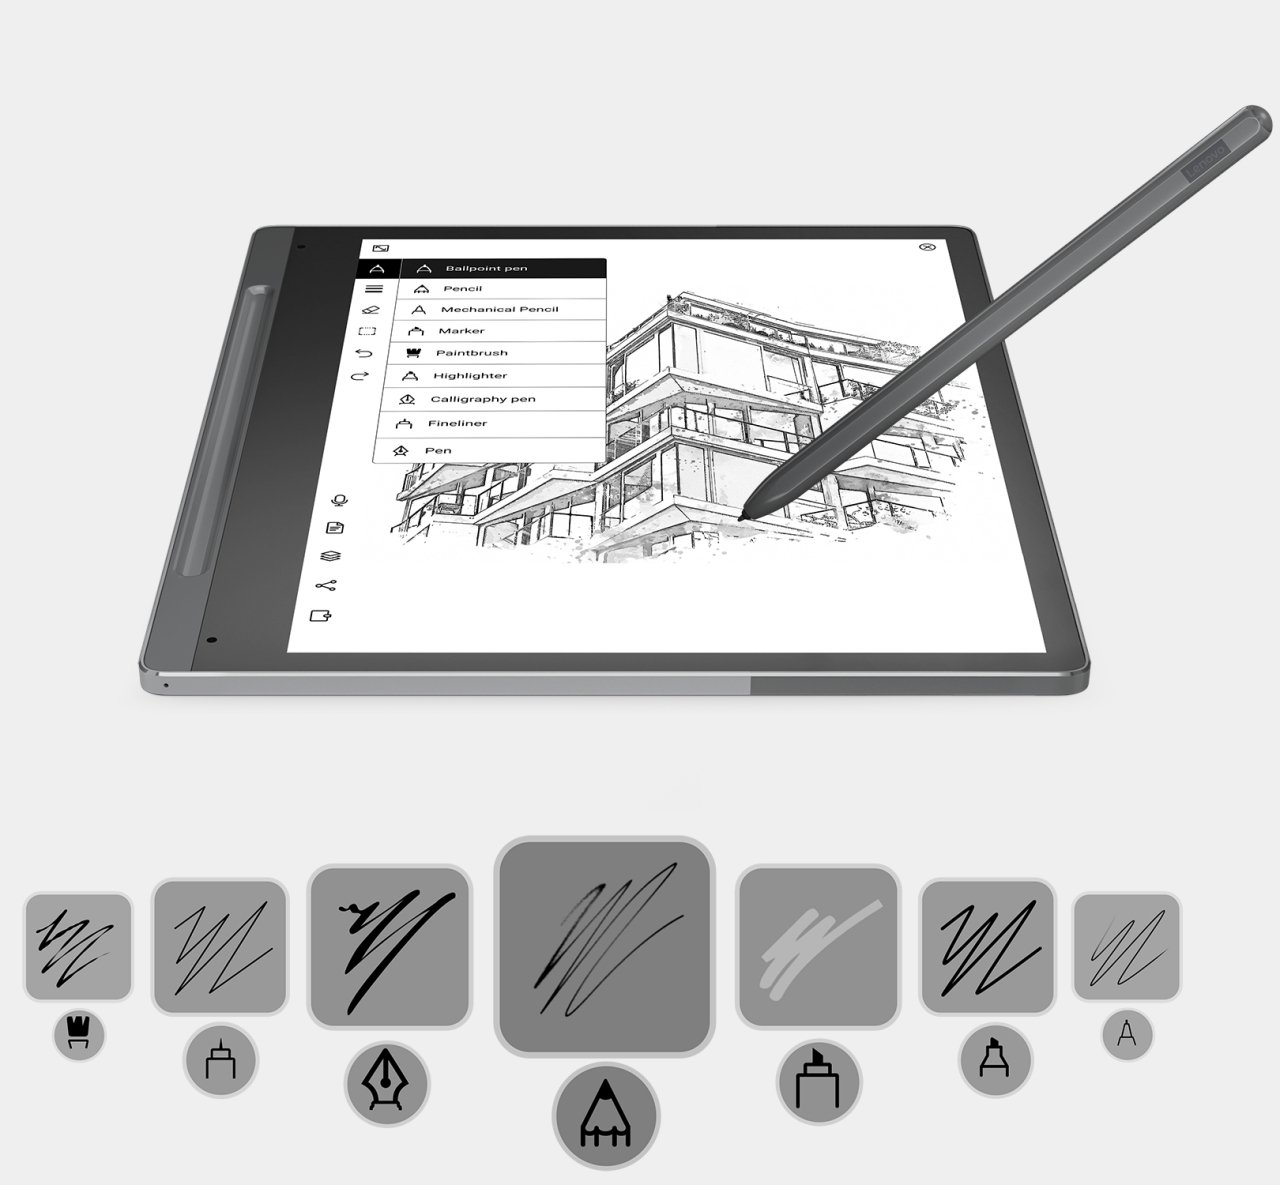 CES 2023: Lenovo's Smart Paper could be a Kindle Scribe killer